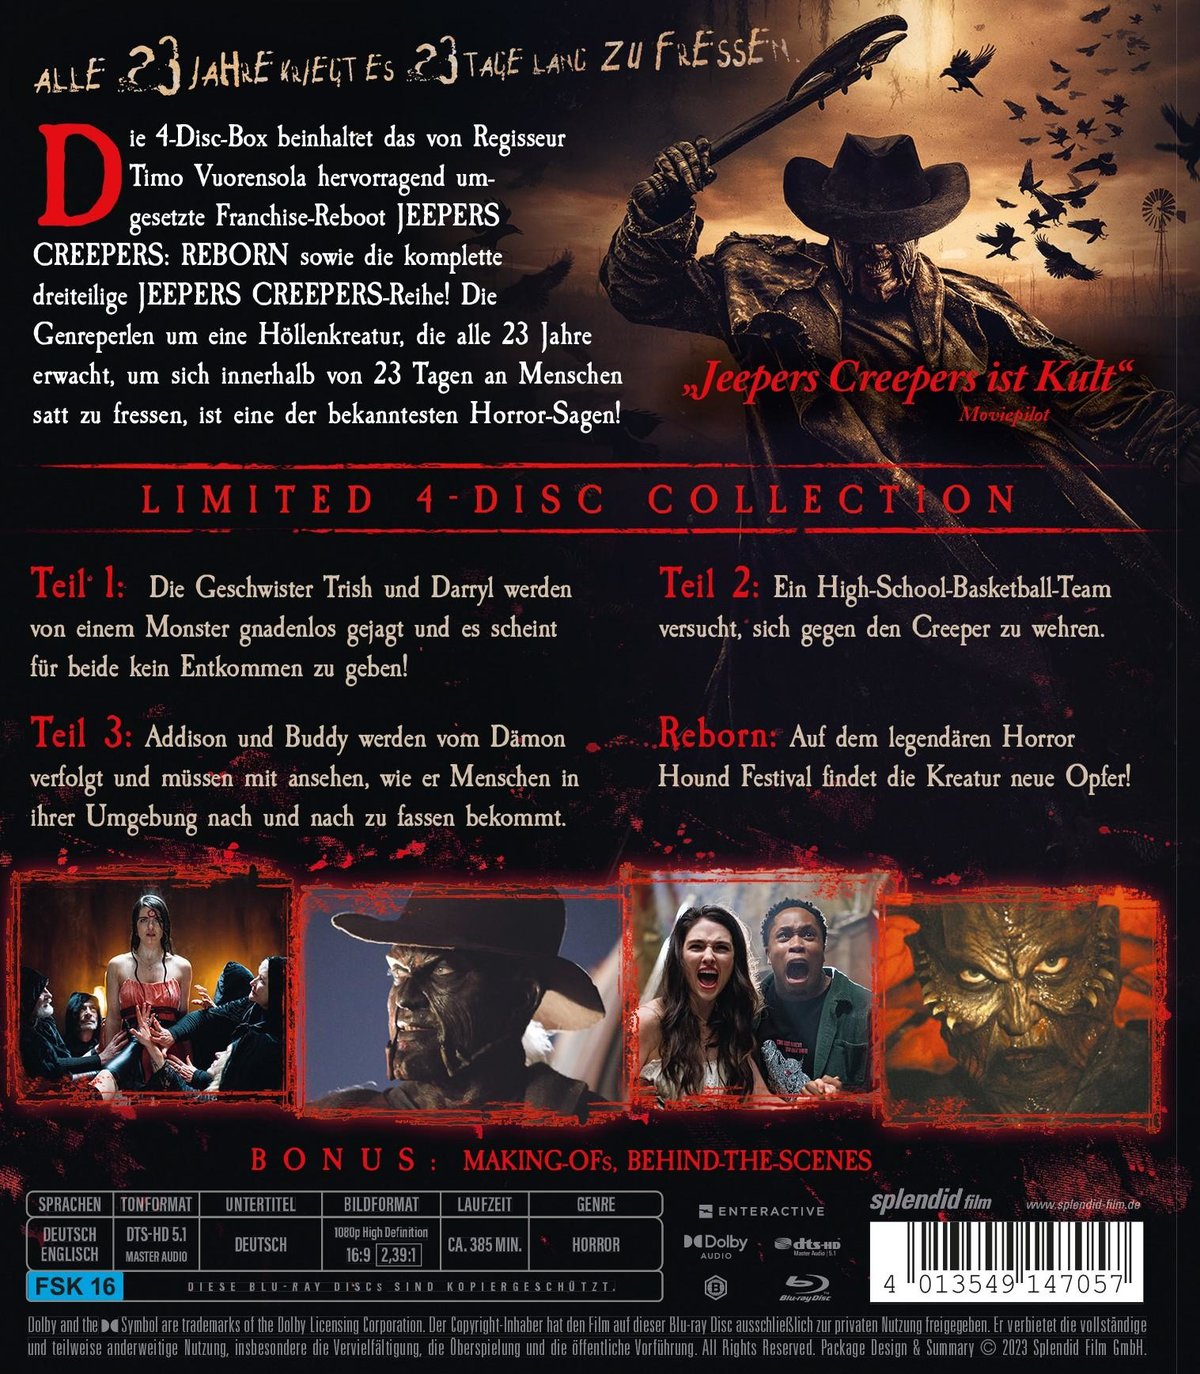 Jeepers Creepers - Limited 4-Disc Collection (blu-ray)